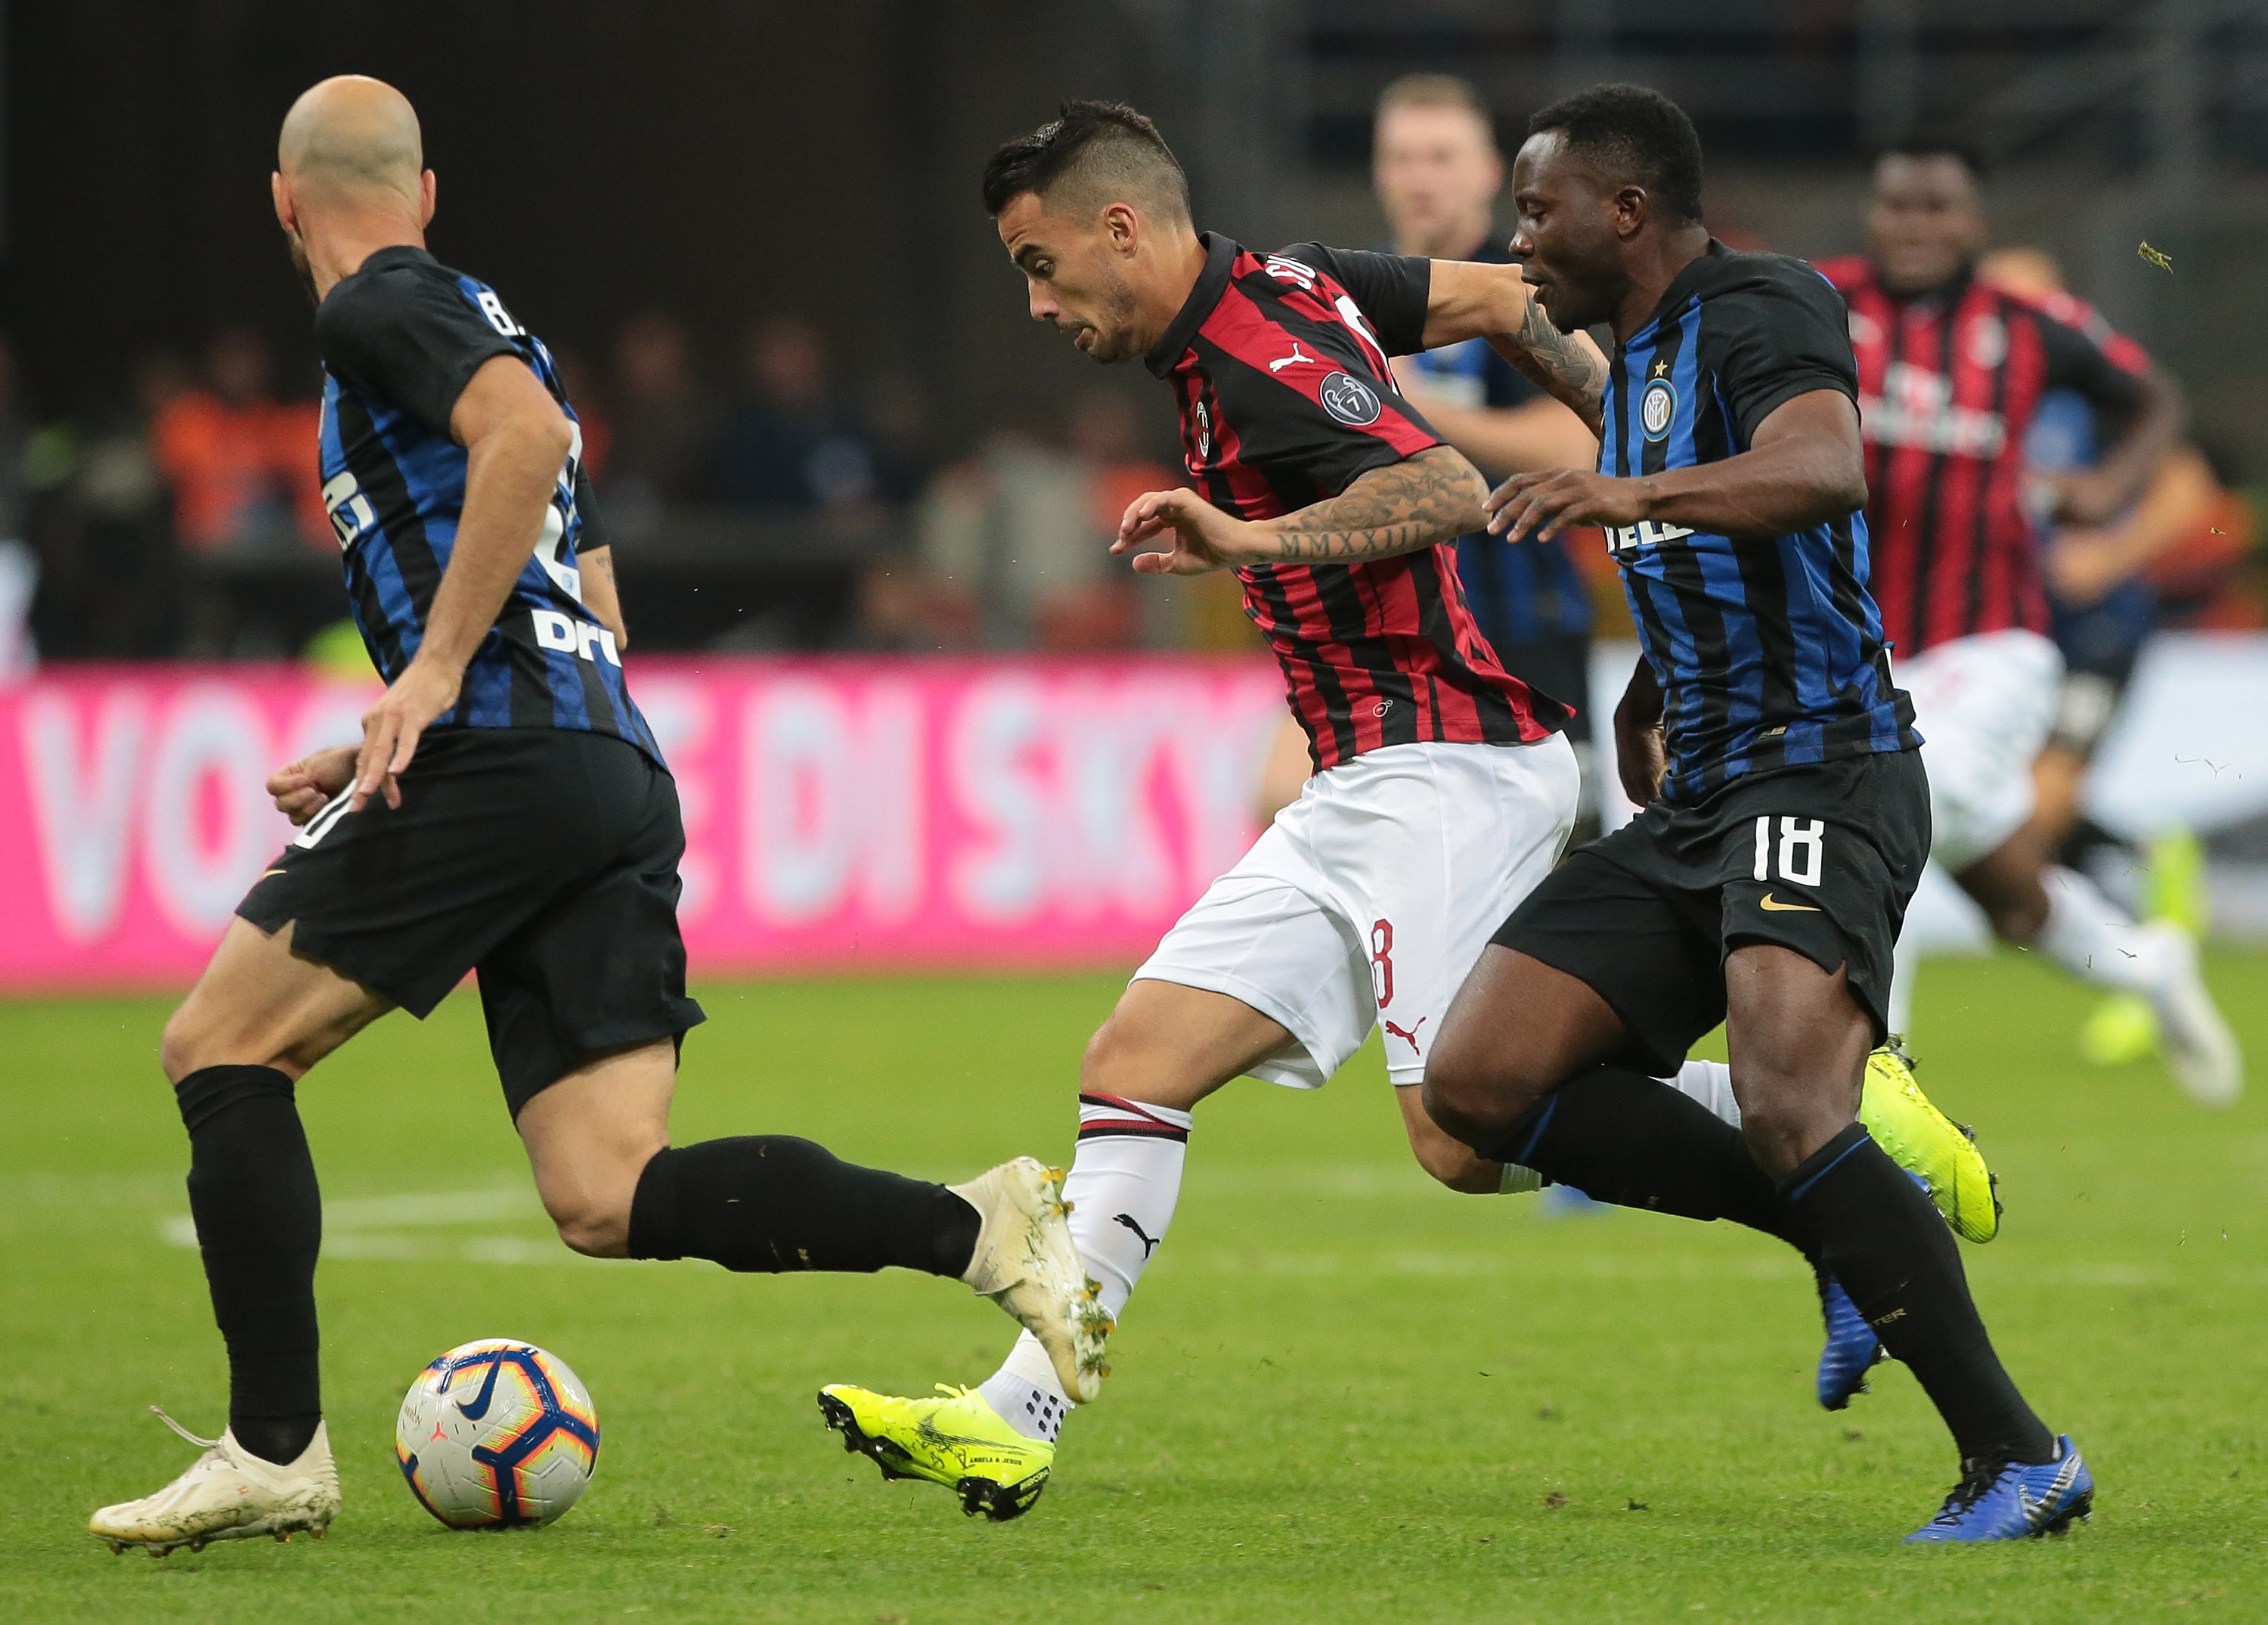 MILAN, ITALY - OCTOBER 21: Fernandez Suso (C) of AC Milan is challenged by Kwadwo Asamoah of FC Internazionale during the Serie A match between FC Internazionale and AC Milan at Stadio Giuseppe Meazza on October 21, 2018 in Milan, Italy. (Photo by Emilio Andreoli/Getty Images)